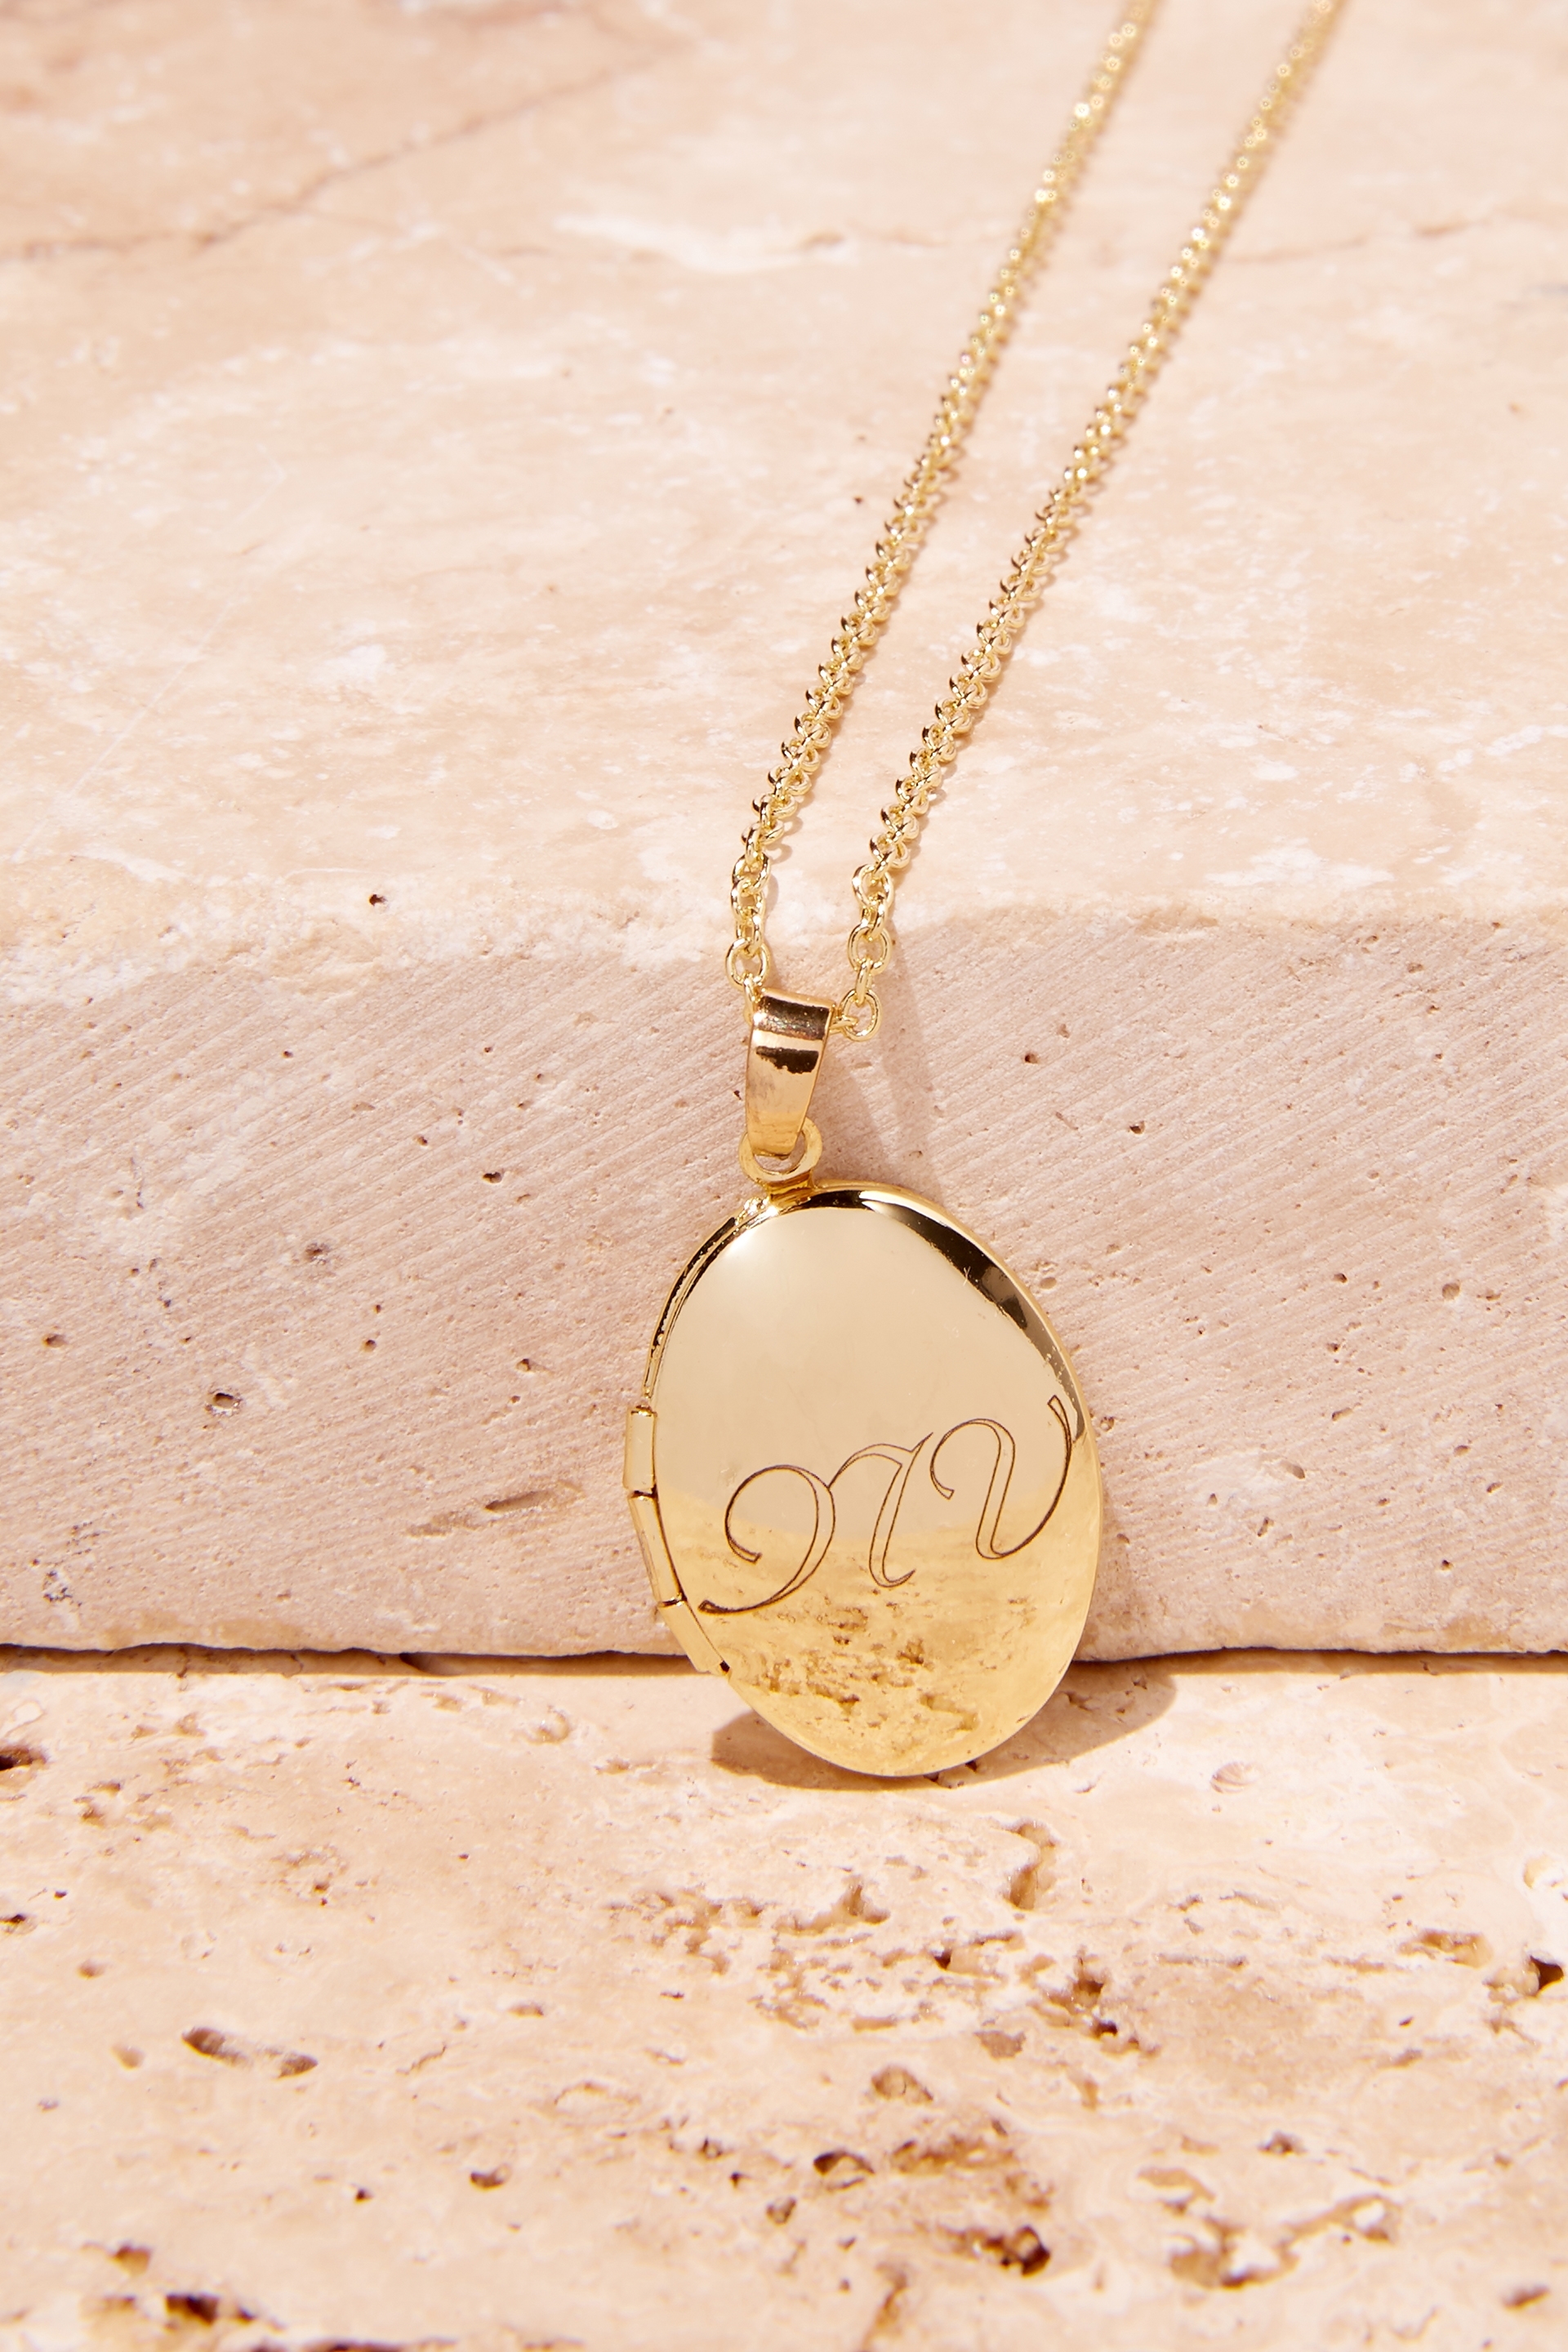 Rubi - Personalised Premium Pendant Necklace Gold Plated - Gold plated locket